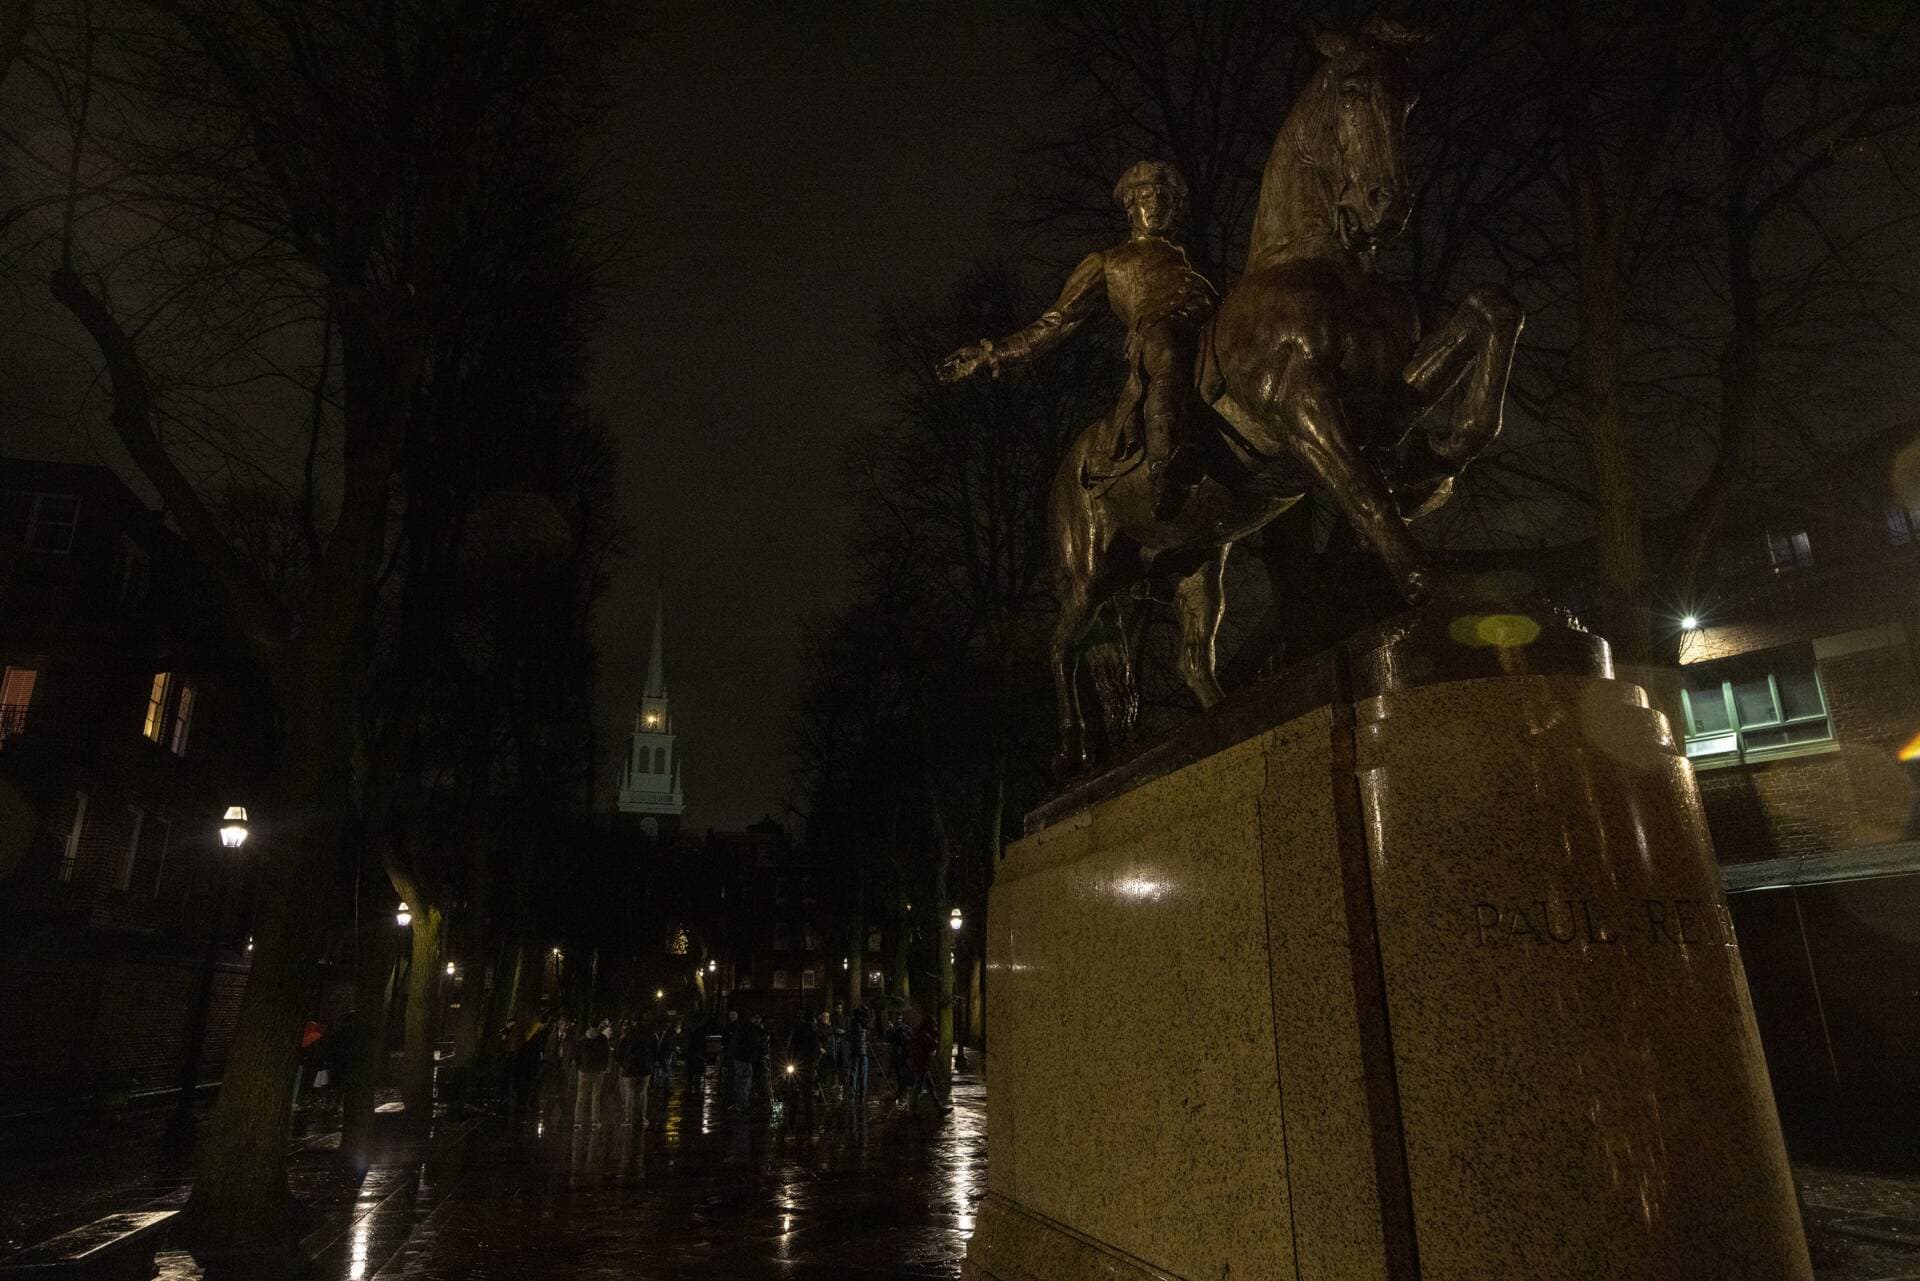 The statue of Paul Revere in the forefront as the lanterns are lit in the Old North Church on Jan. 5, 2022. (Jesse Costa/WBUR)